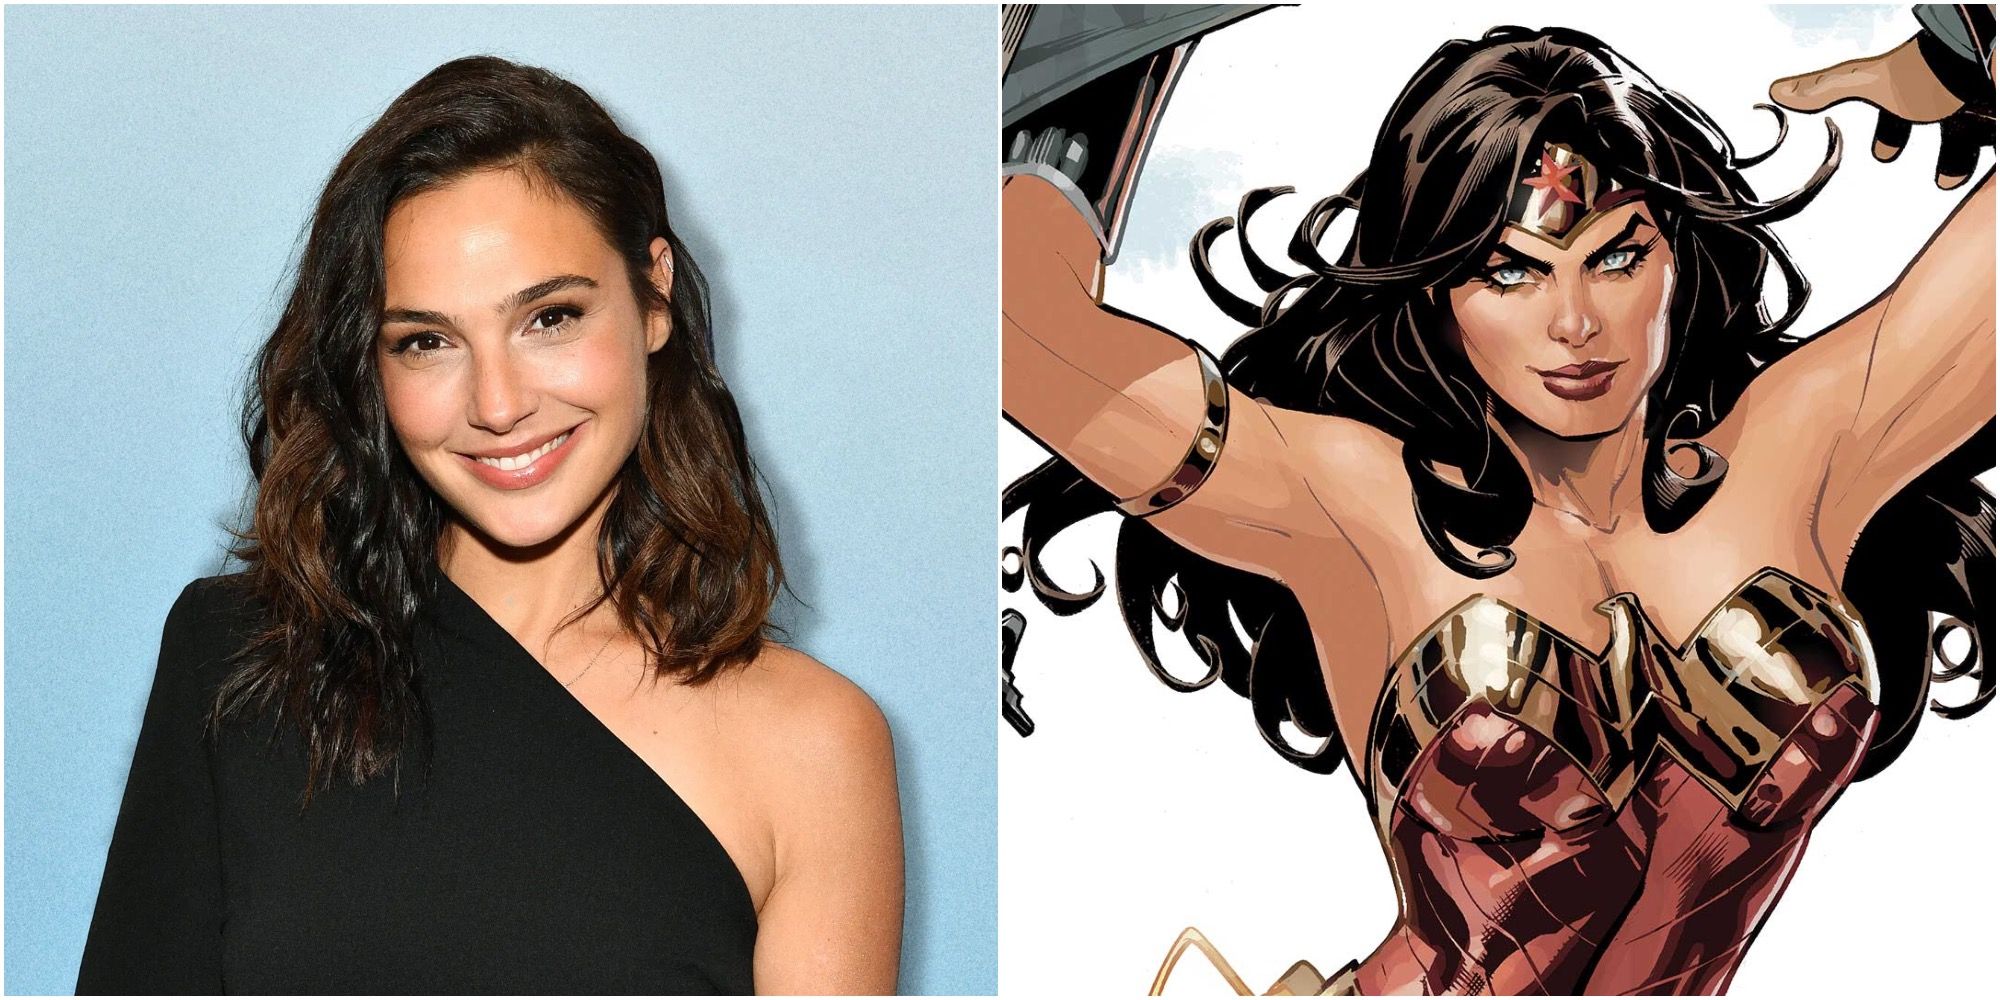 Gal Gadot and Wonder Woman in the comics